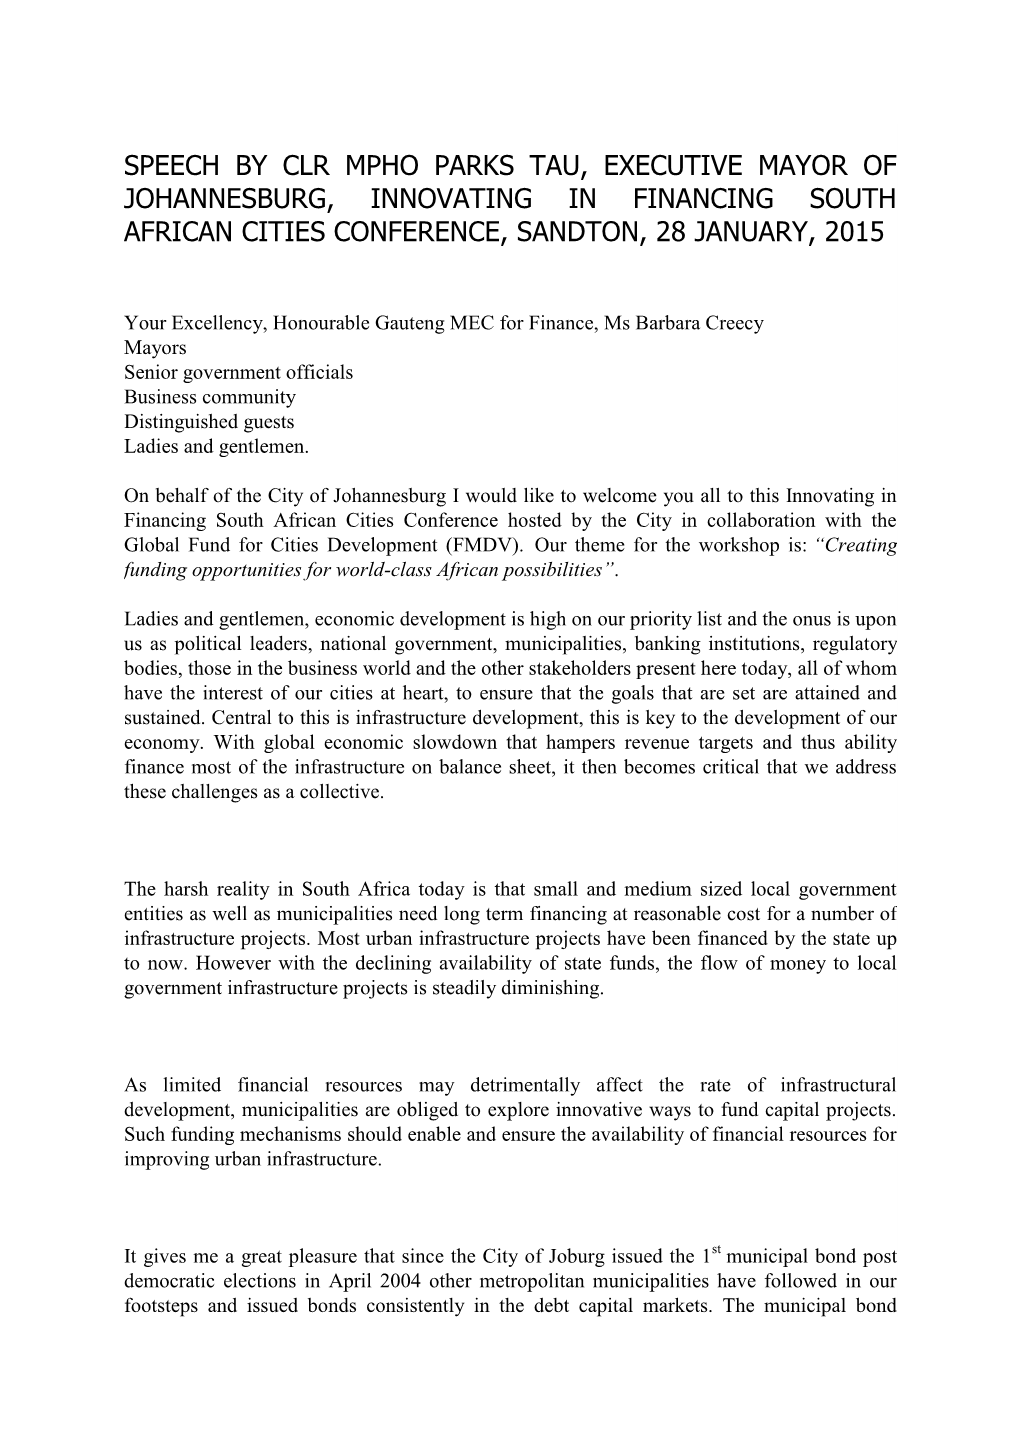 Speech by Clr Mpho Parks Tau, Executive Mayor of Johannesburg, Innovating in Financing South African Cities Conference, Sandton, 28 January, 2015